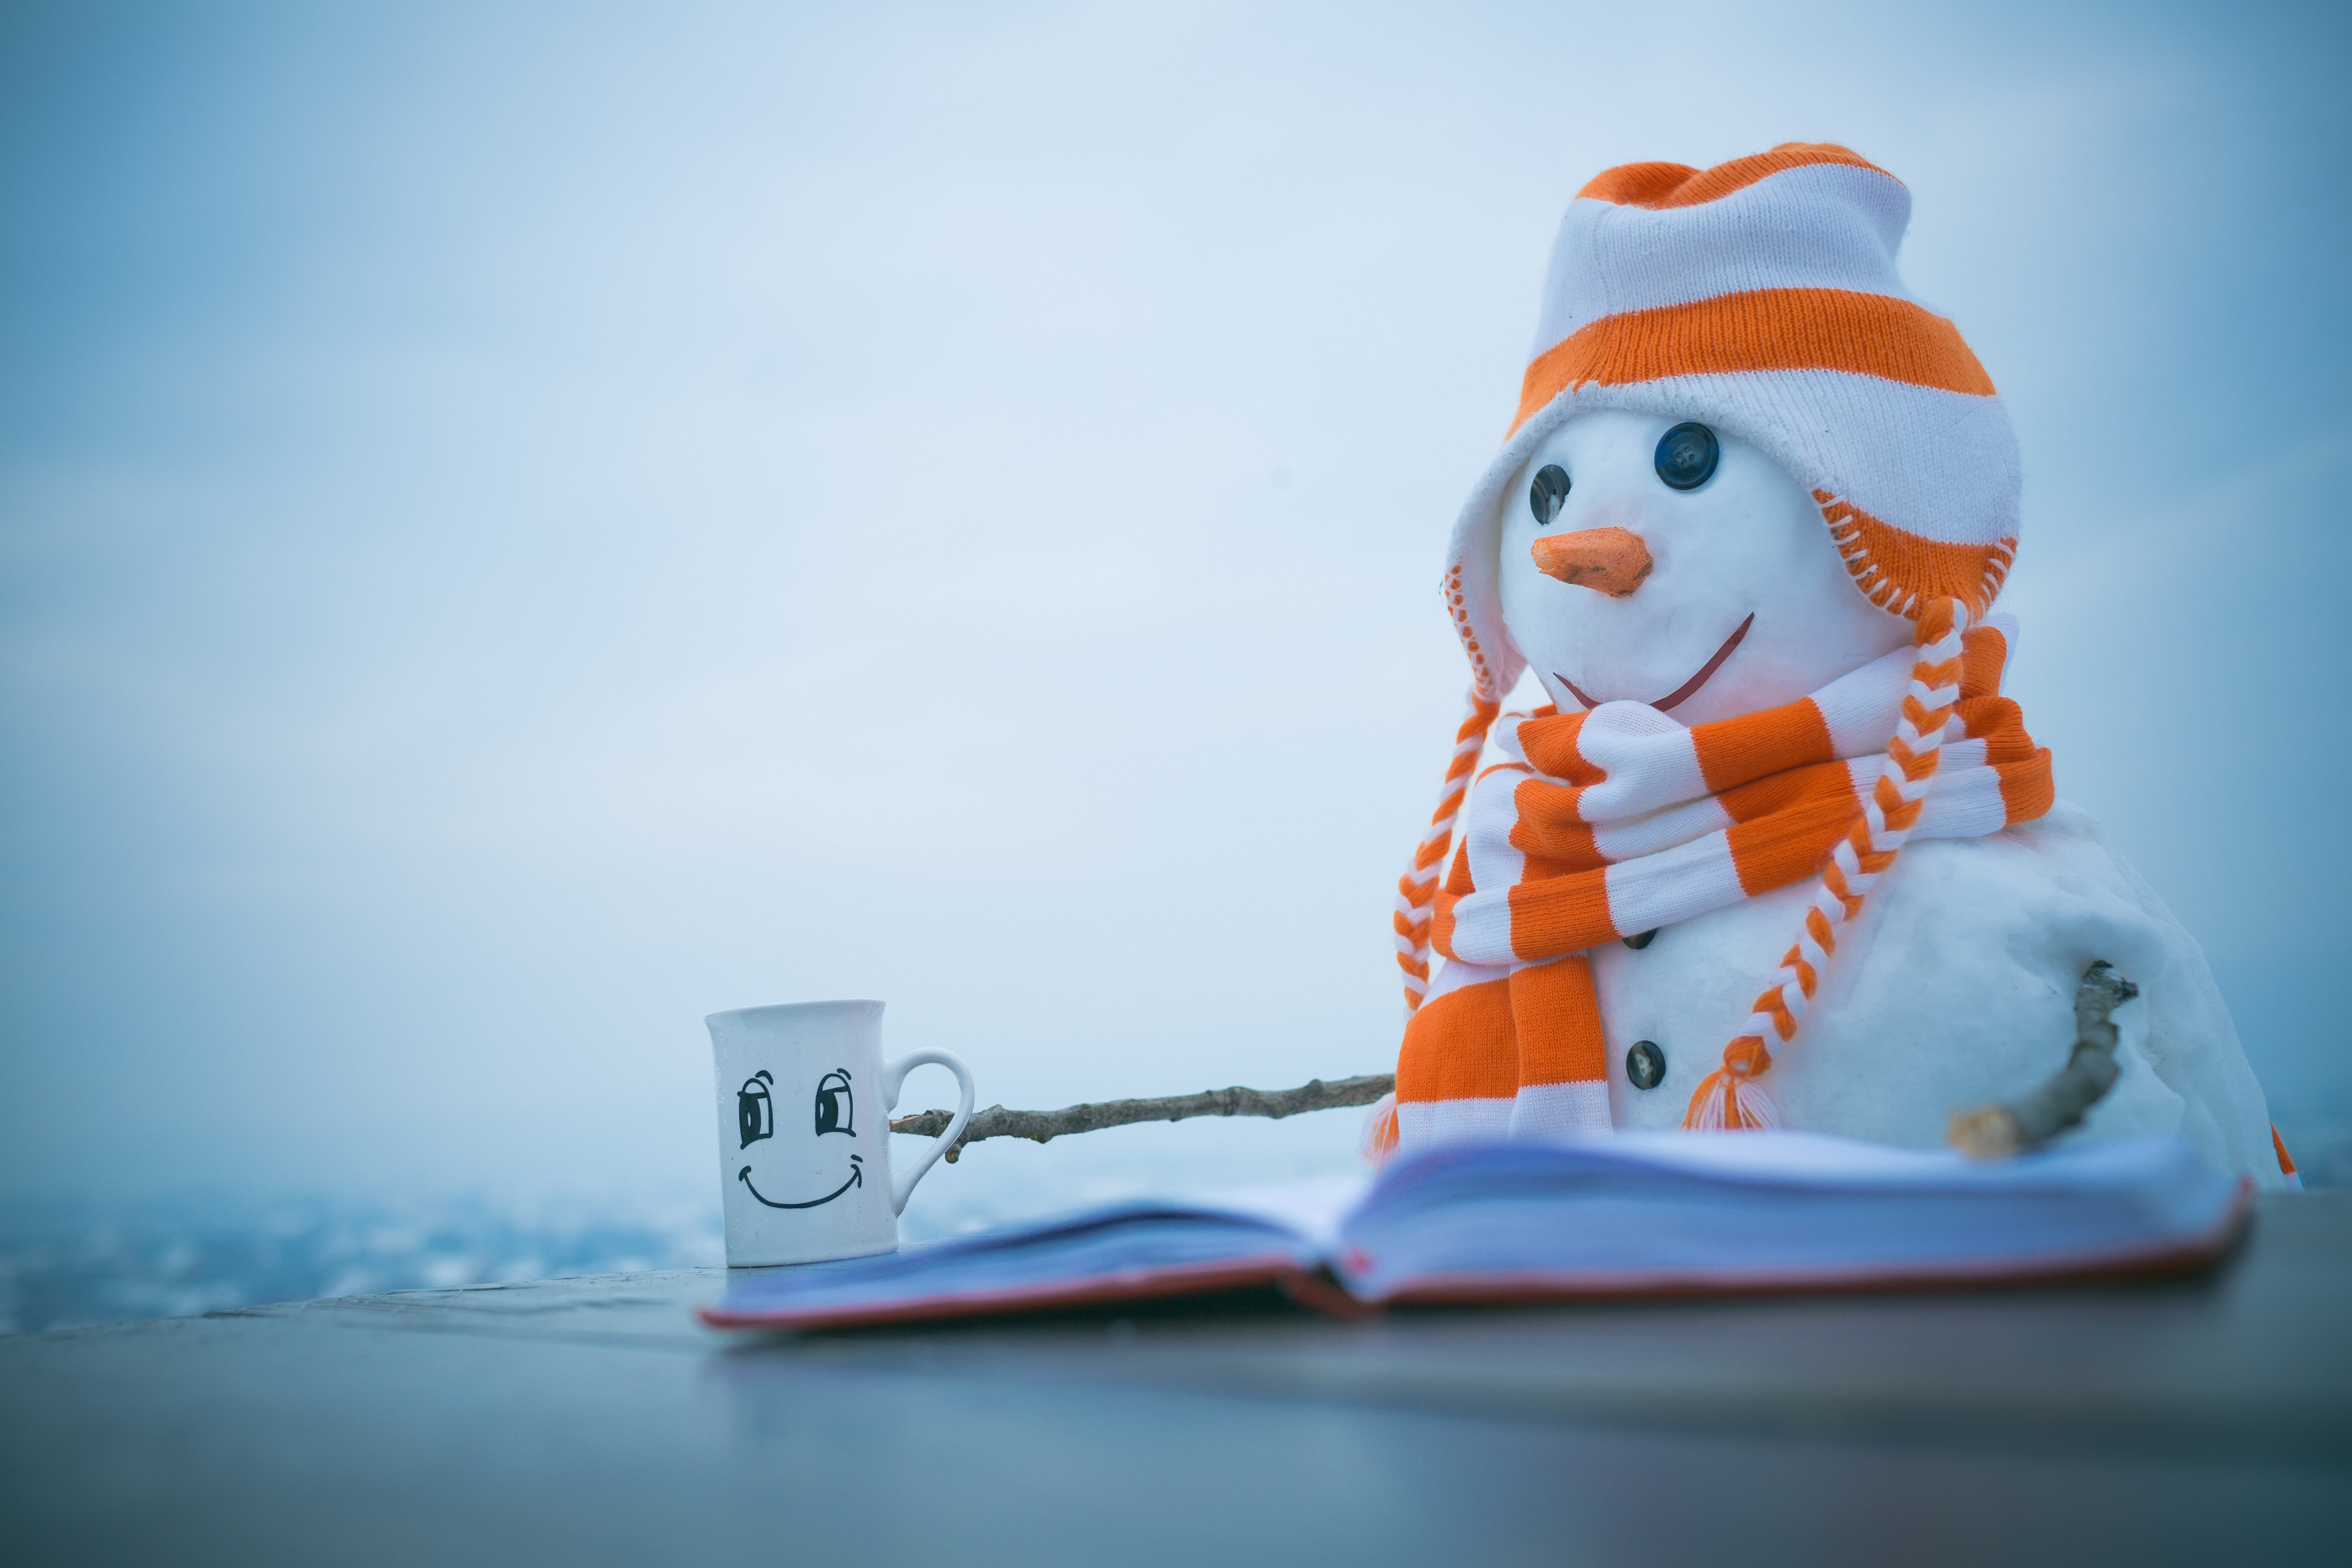 Graphic of snowman wearing hat, scarf. they are reading a book with a mug